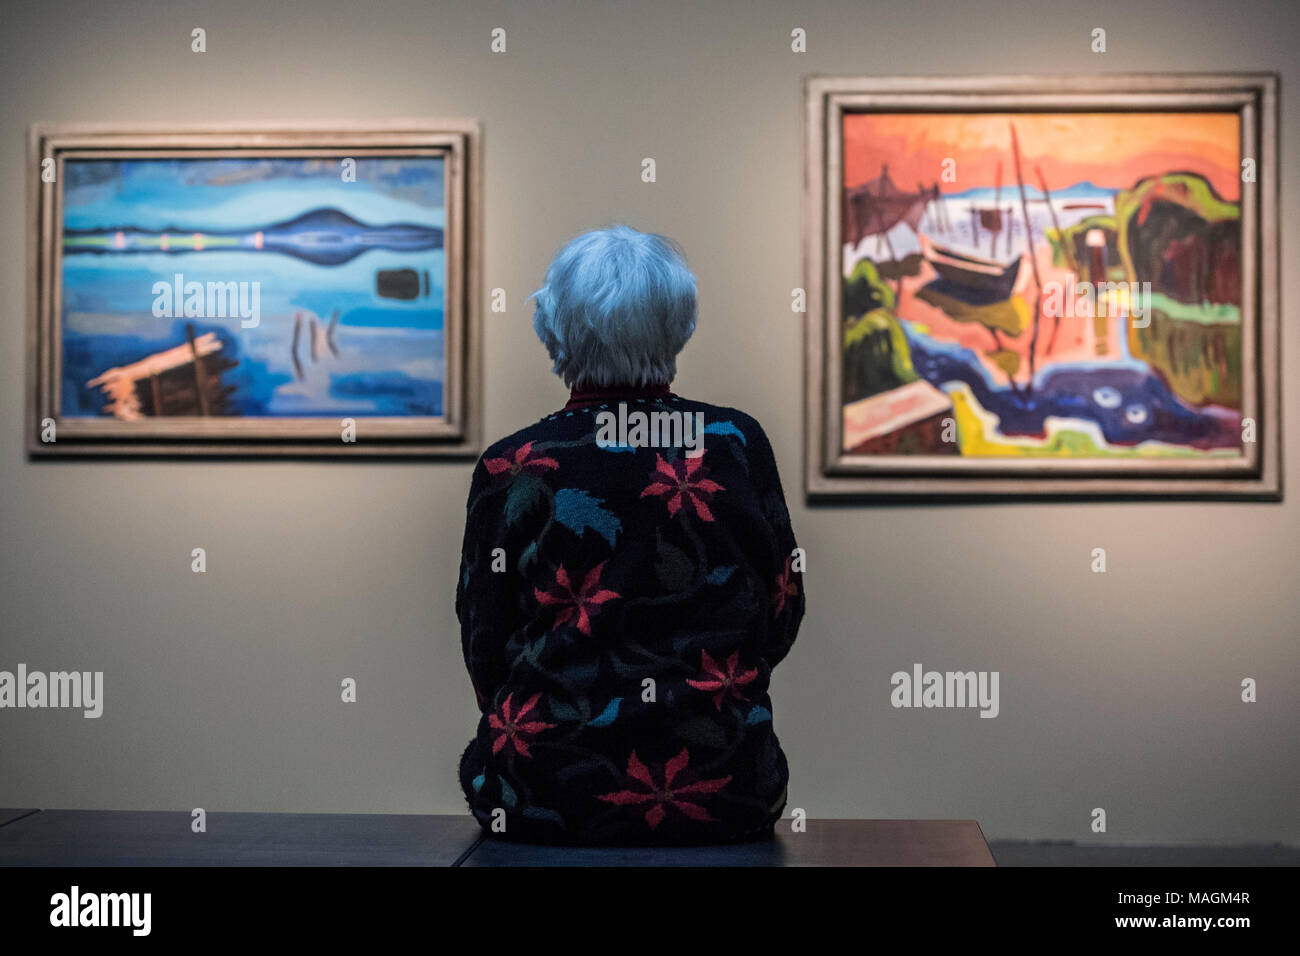 ILLUSTRATION - 16 March 2018, Germany, Hamburg: An elderly woman with rollator looks at the paintings 'Spiegelnder See' (L, 1936) (lit. reflective lake) and 'Fischerbucht' (1937) (lit. fishing bay) by Karl Schmidt-Rottluff at the Bucerius Arts Forum in Hamburg. The Hamburg museum Bucerius Arts Forum offers guided exhibition tours particularly for dementia patients. Photo: Malte Christians/dpa Stock Photo